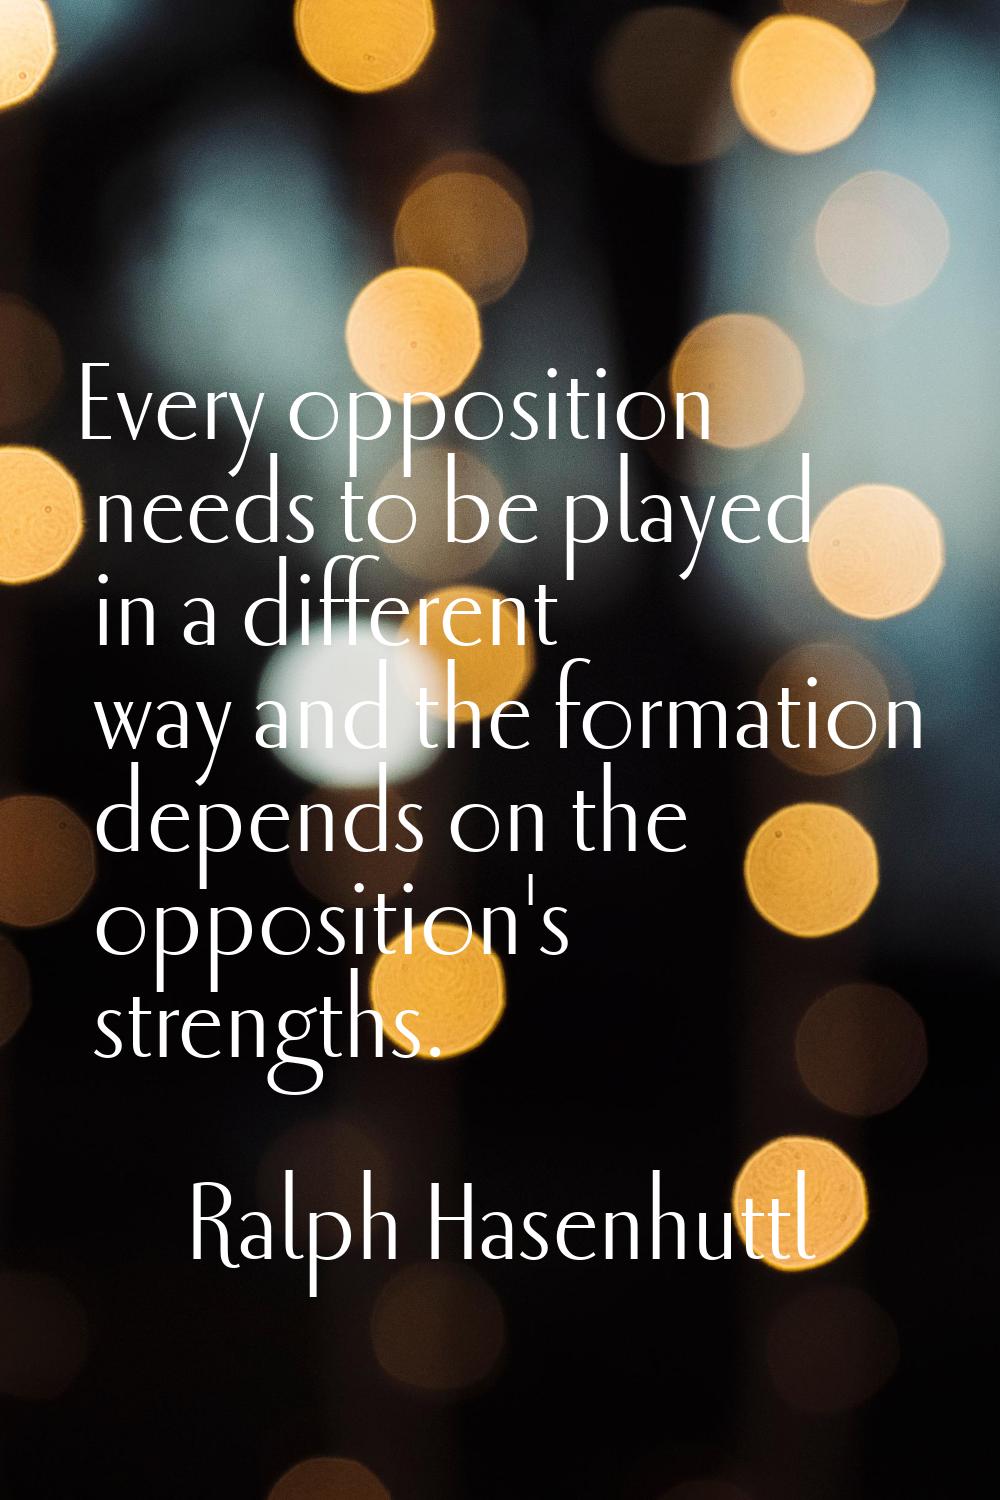 Every opposition needs to be played in a different way and the formation depends on the opposition'